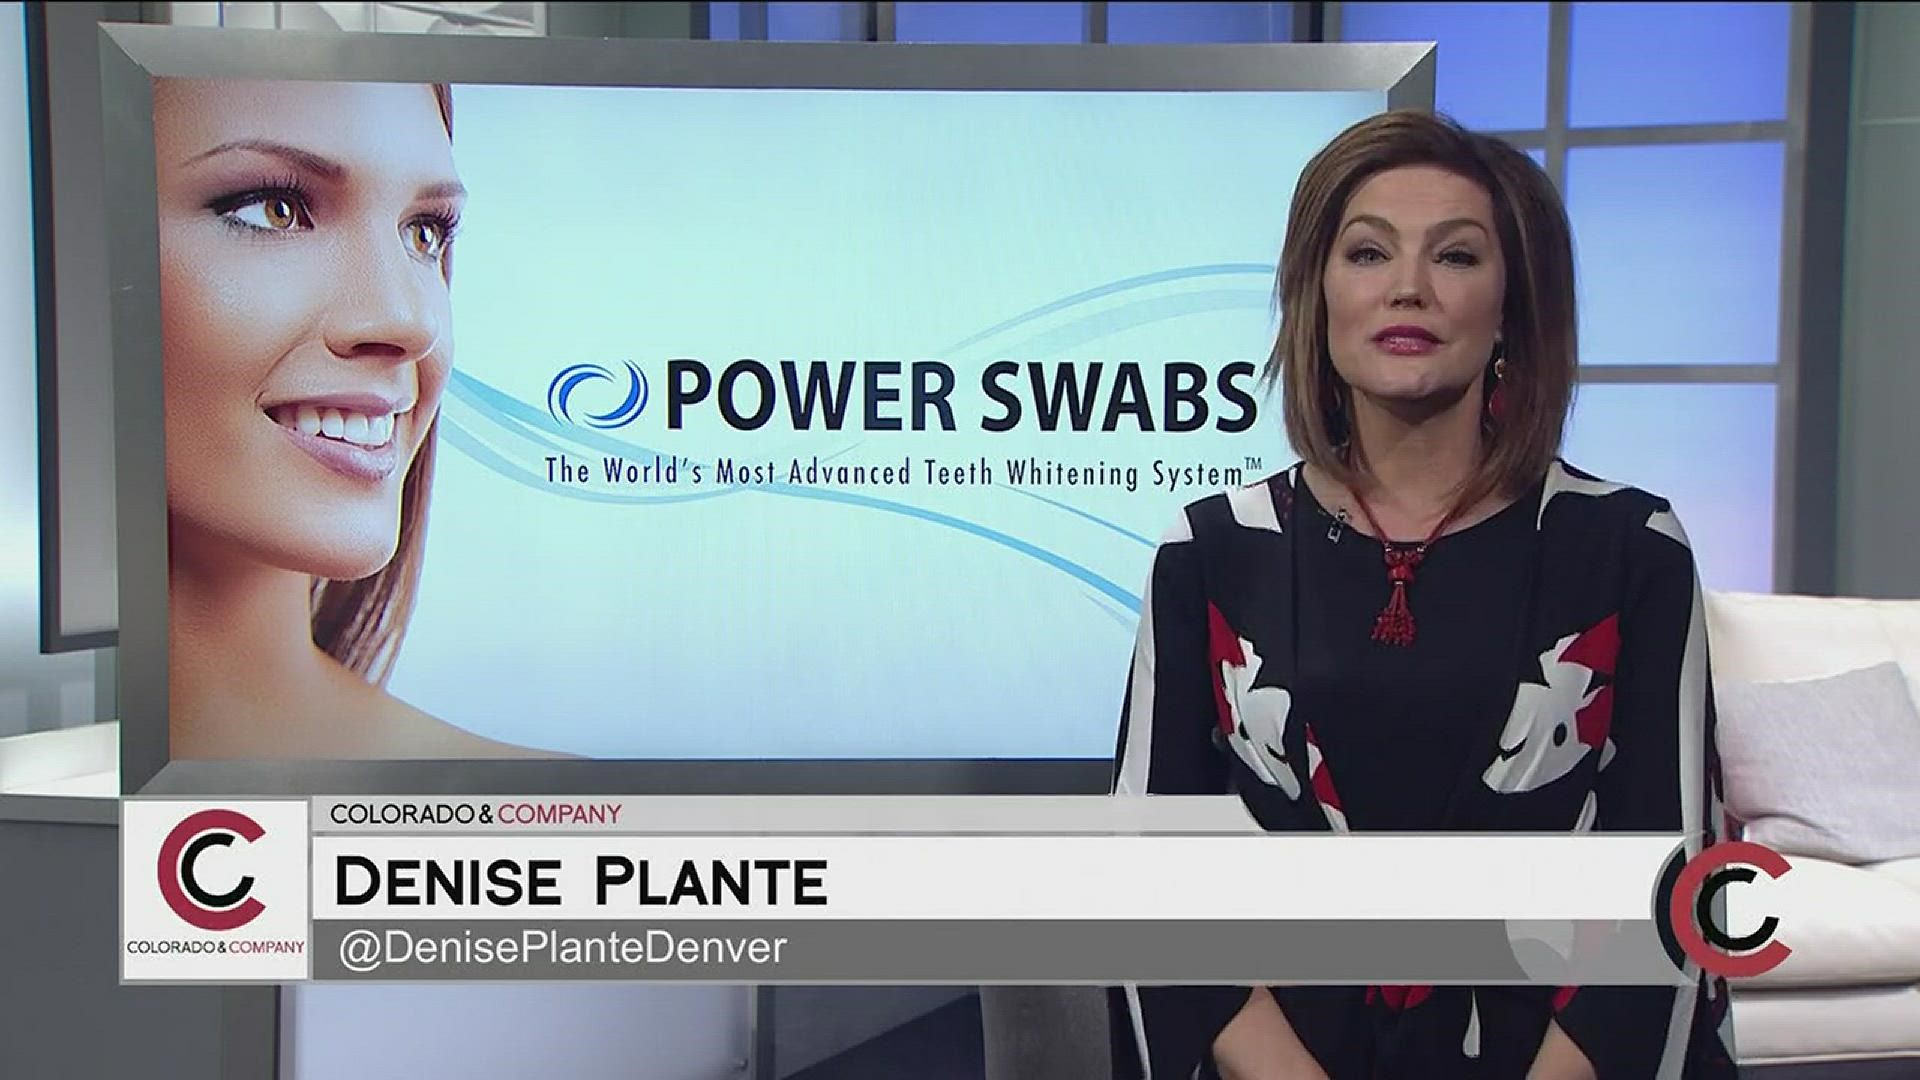 Enjoy a whiter and brighter smile in 5 minutes with just a swab of a stick! Call 1.800.489.9733 to order Power Swabs today. Colorado and Company viewers can get 40% off a Power Swabs AND free shipping! Check them out online at www.PowerSwabs.com. 
THIS INTERVIEW HAS COMMERCIAL CONTENT. PRODUCTS AND SERVICES FEATURED APPEAR AS PAID ADVERTISING.